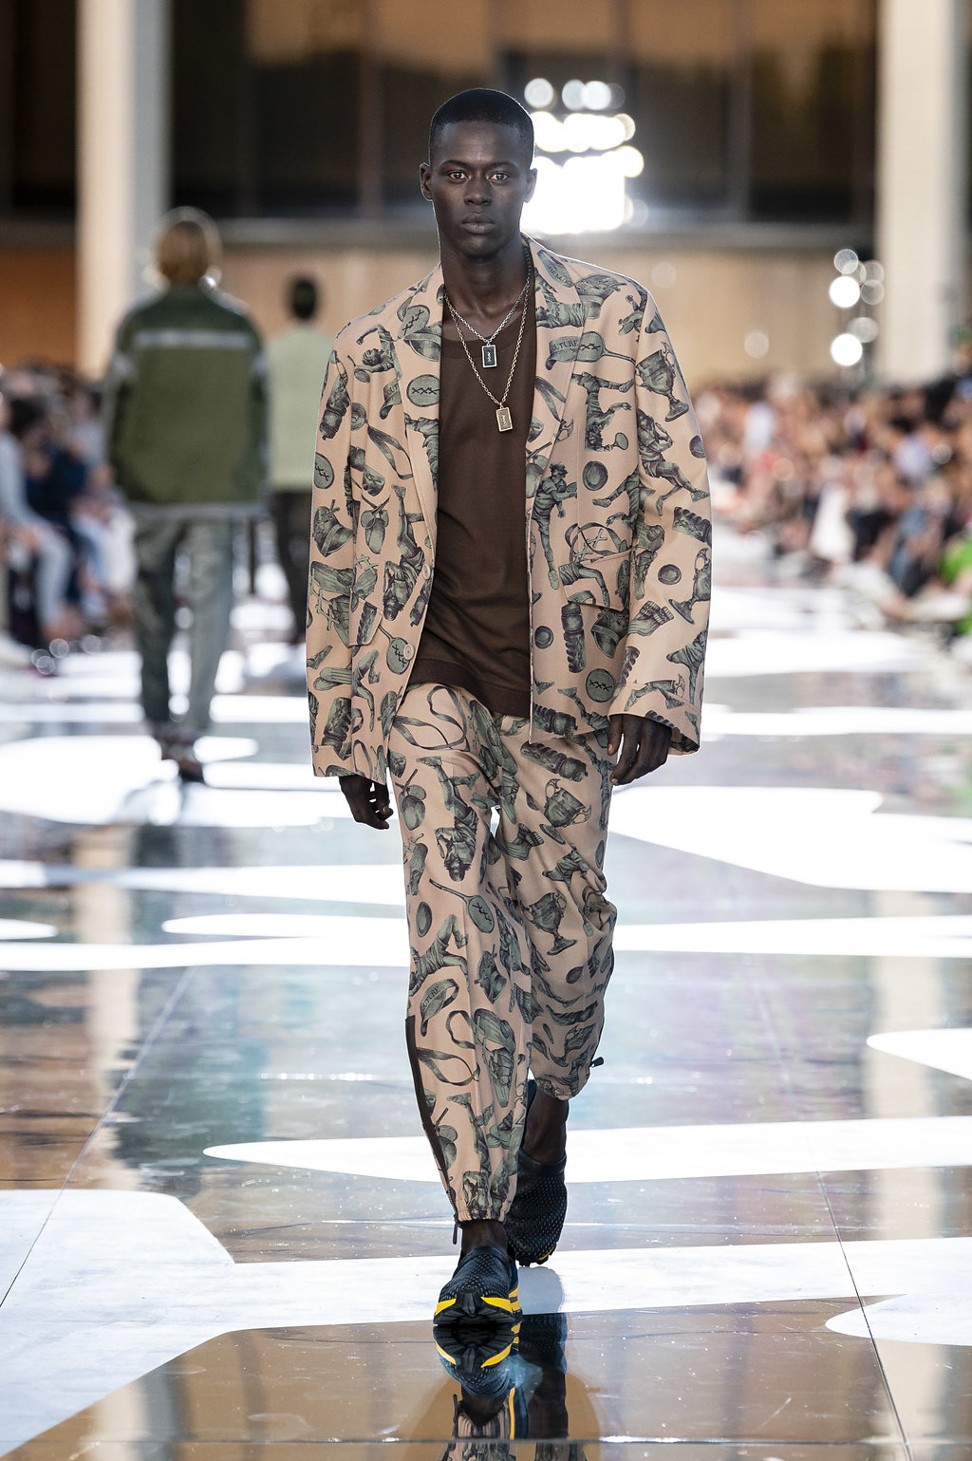 Zegna’s spring/summer 2019 collection